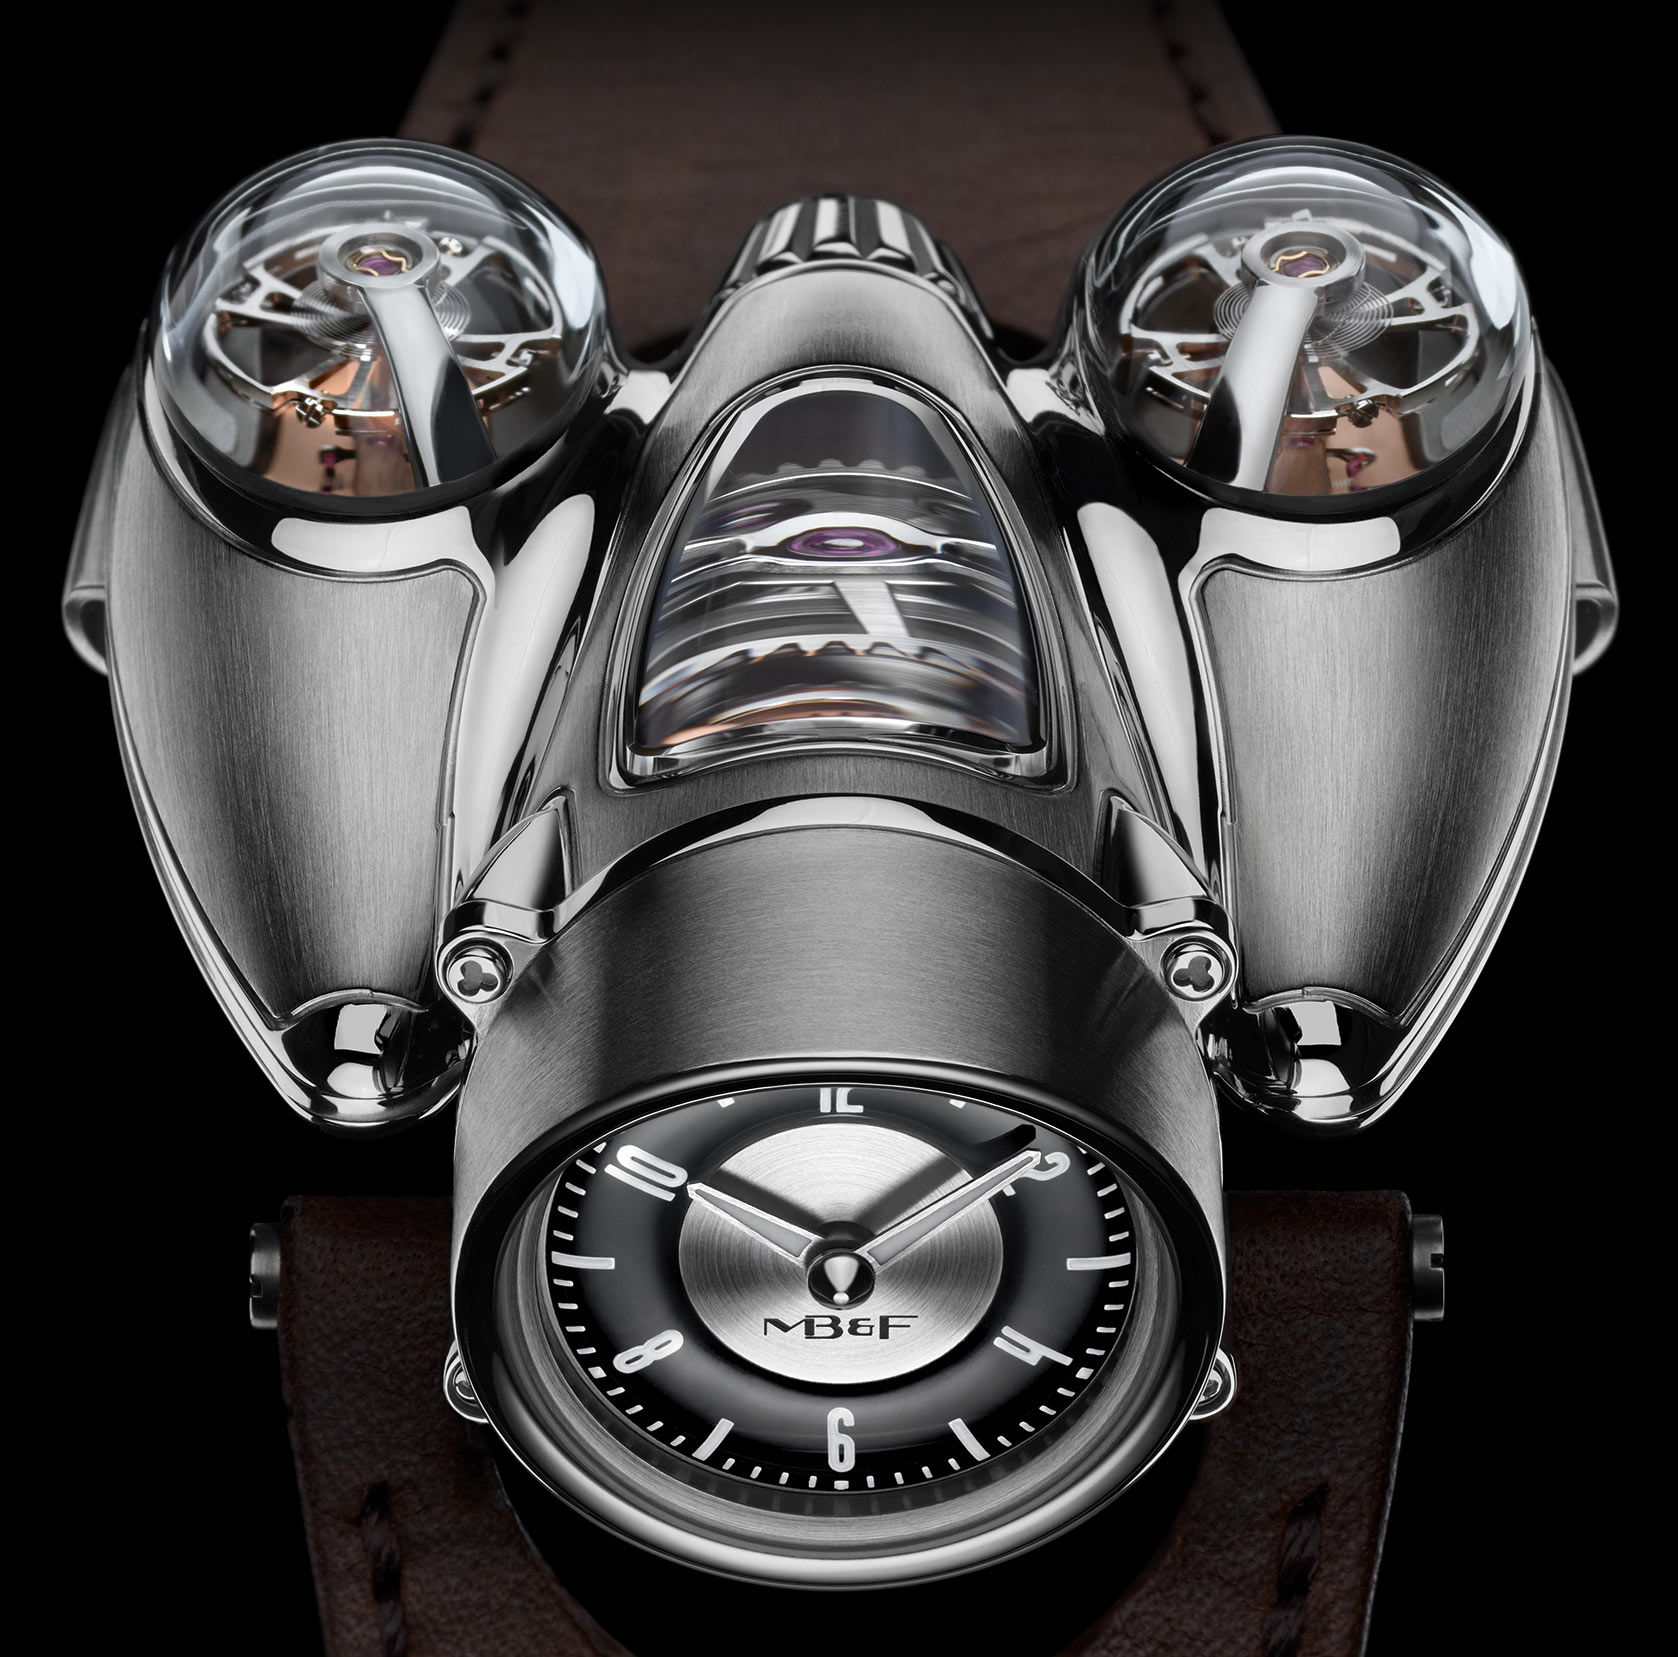 MB&F's new Horological Machine No. 9 Flow watches MBF-Horological-Machine-No-9-HM9-Flow-Air-Road-aBlogtoWatch-5